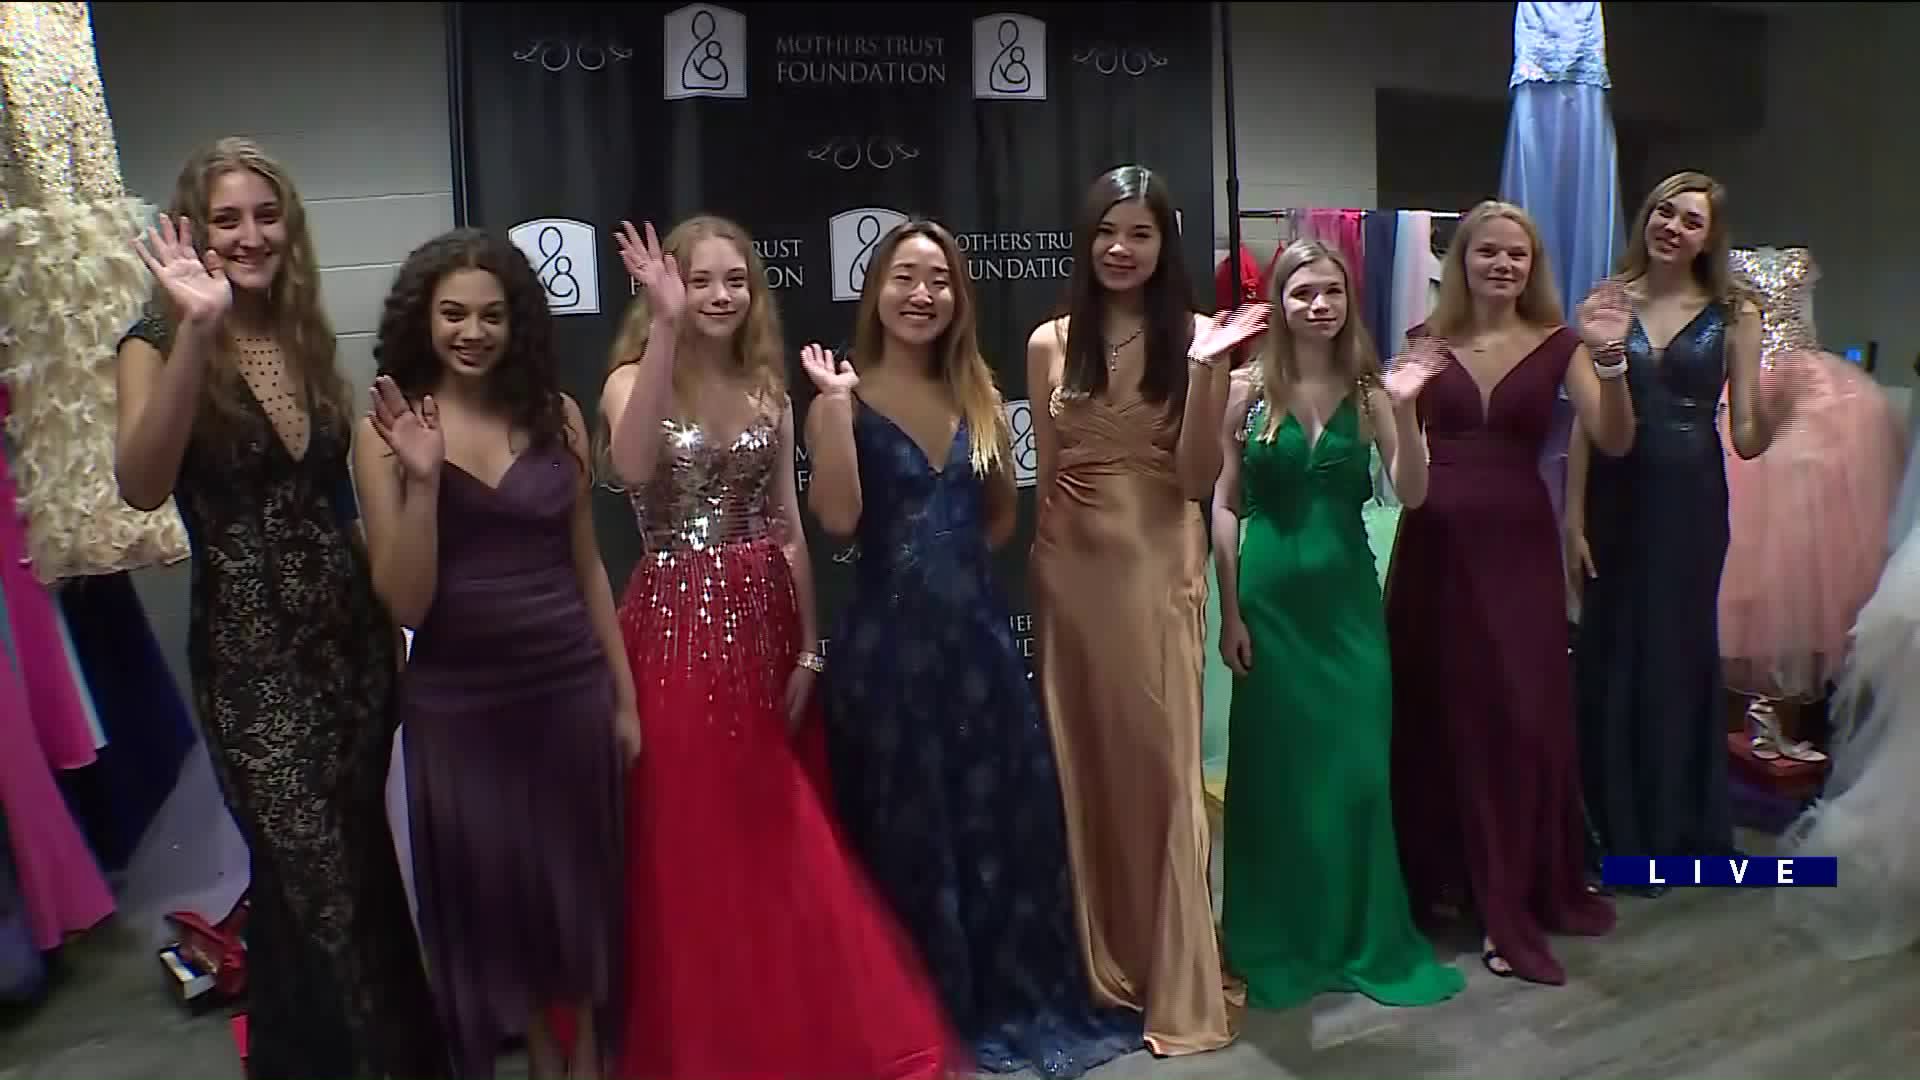 Around Town checks out the Mothers Trust Foundation Pop Up Prom Shoppe